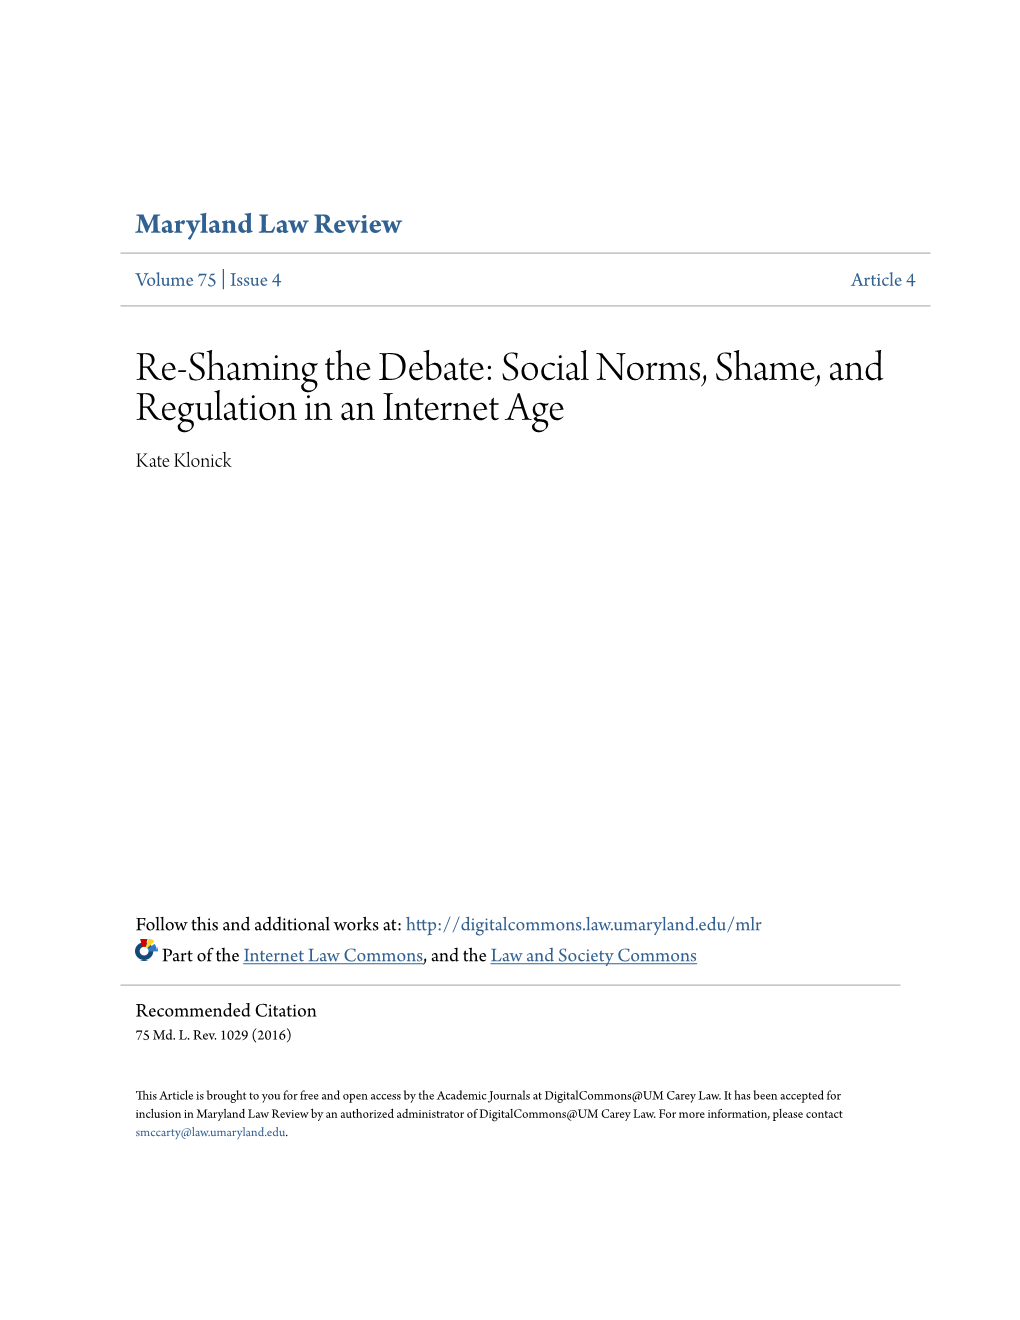 Social Norms, Shame, and Regulation in an Internet Age Kate Klonick